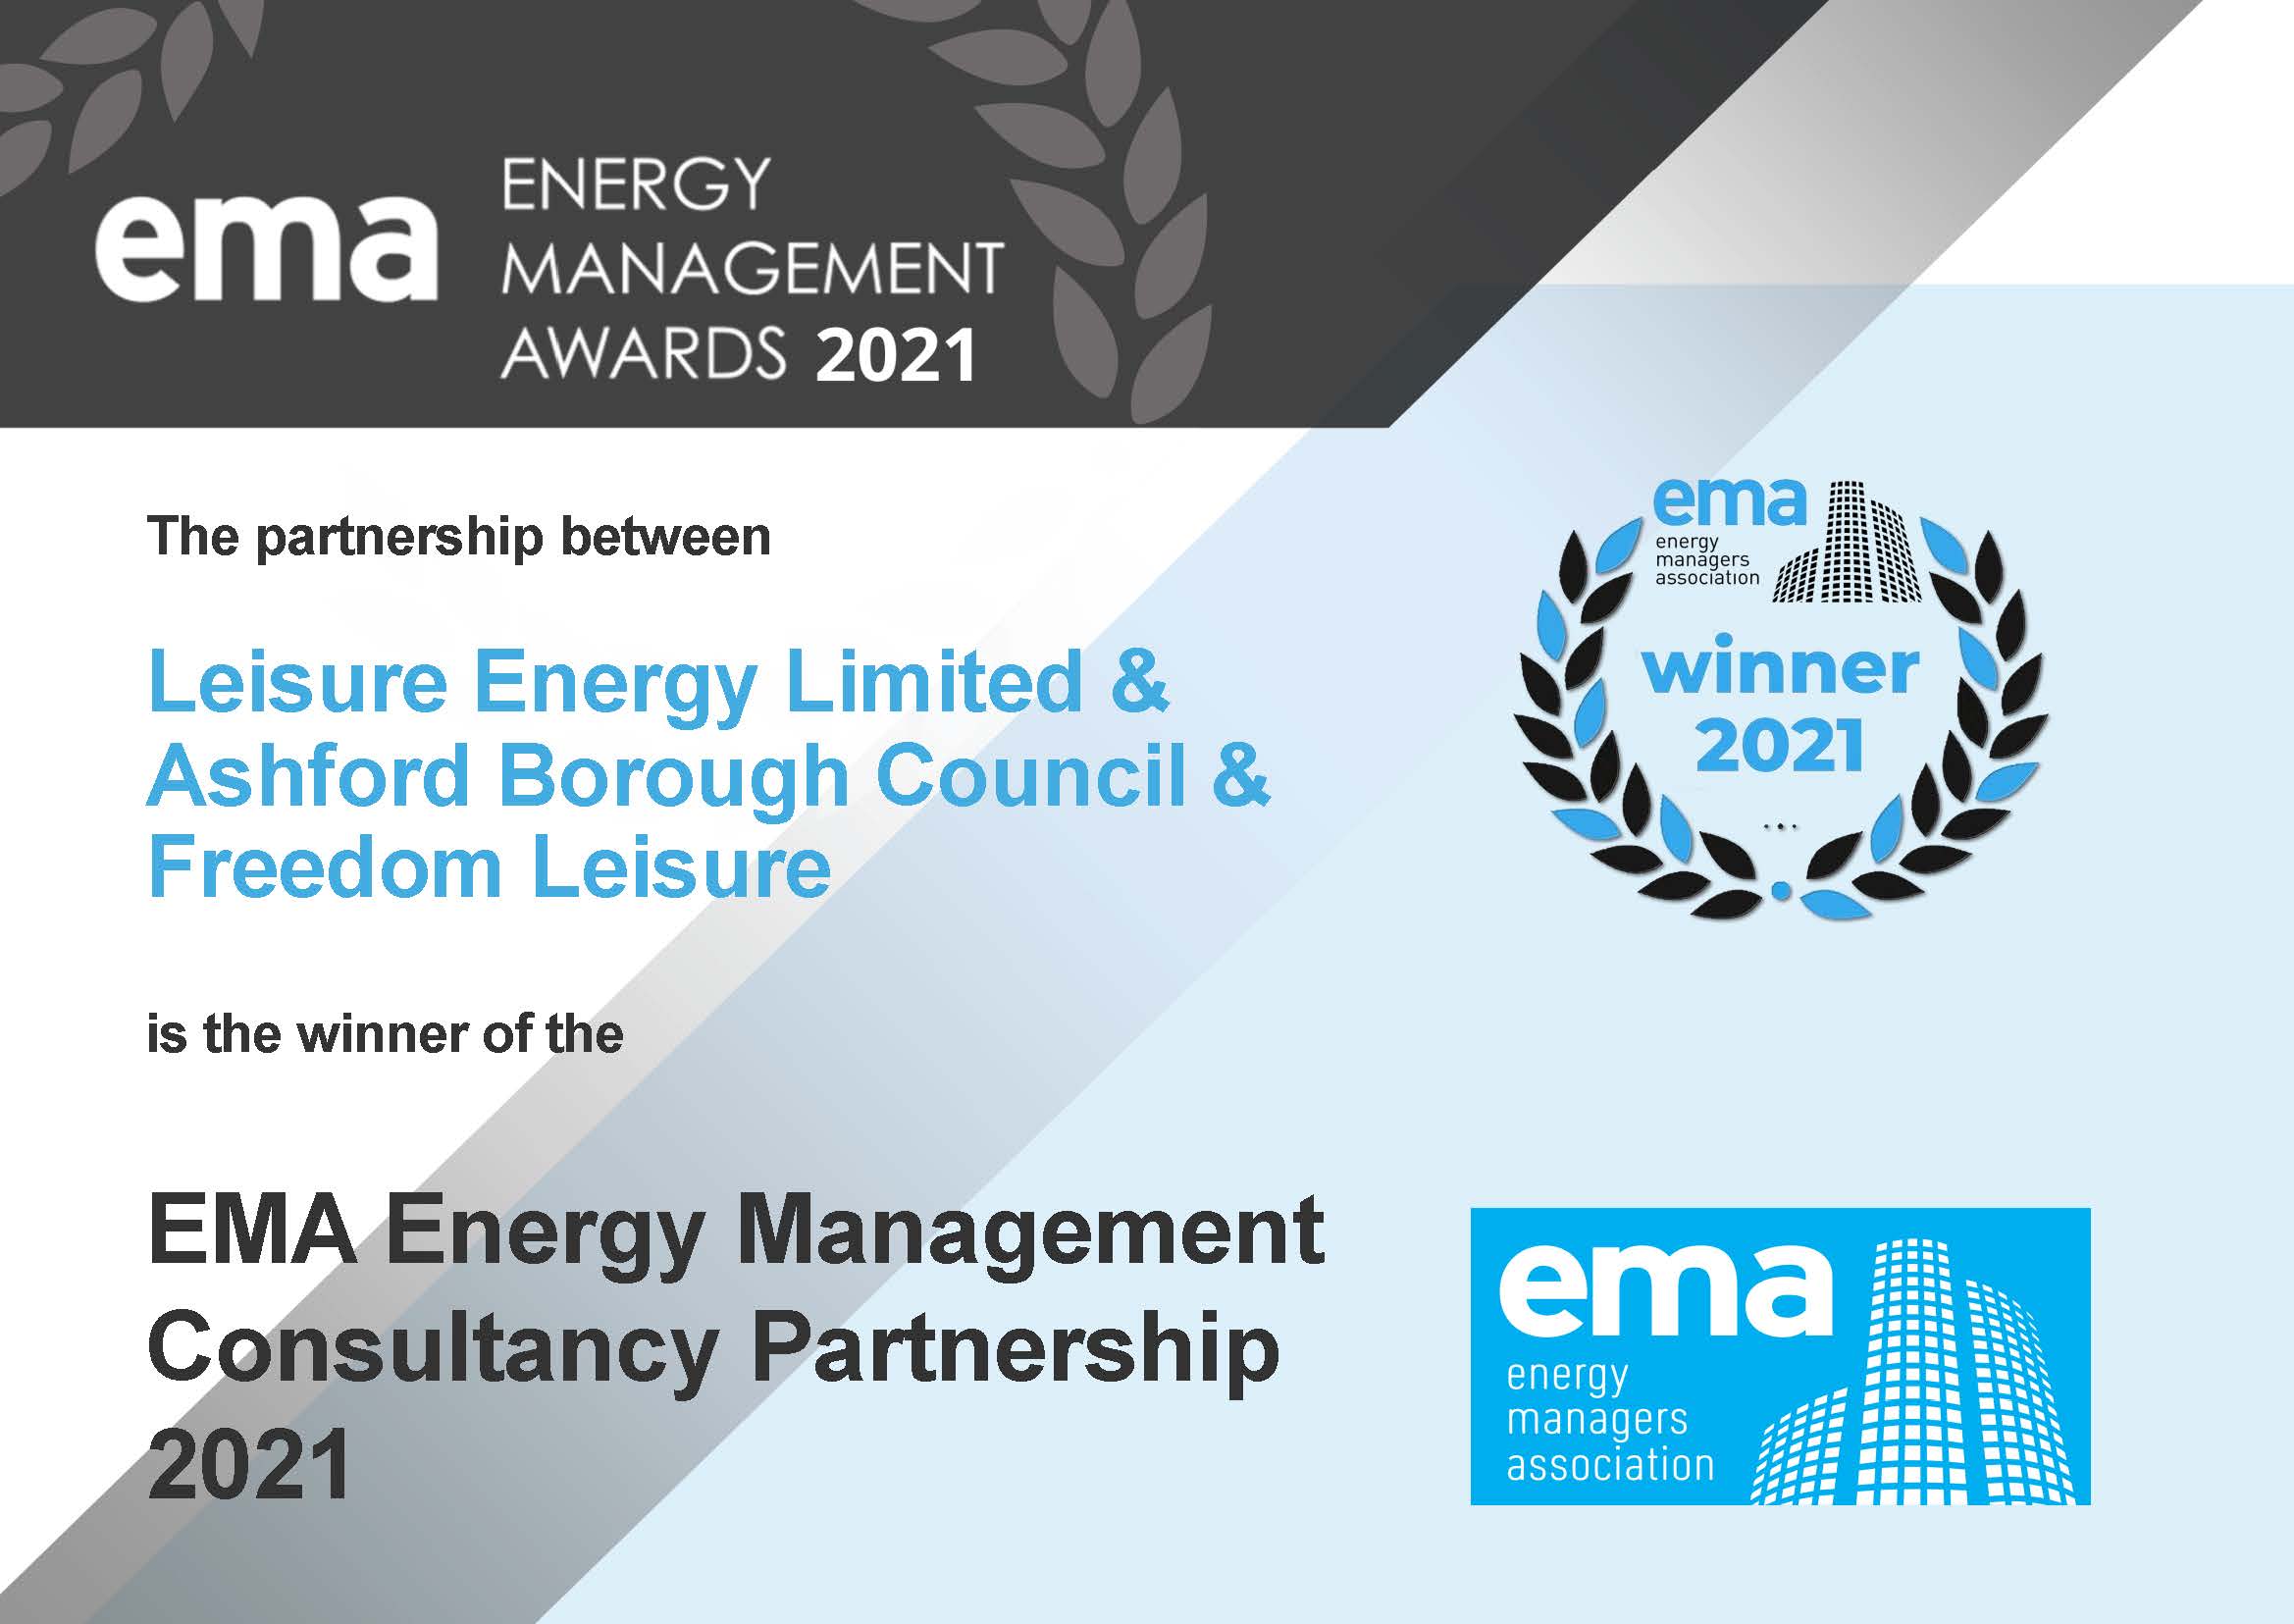 Energy Managers Association